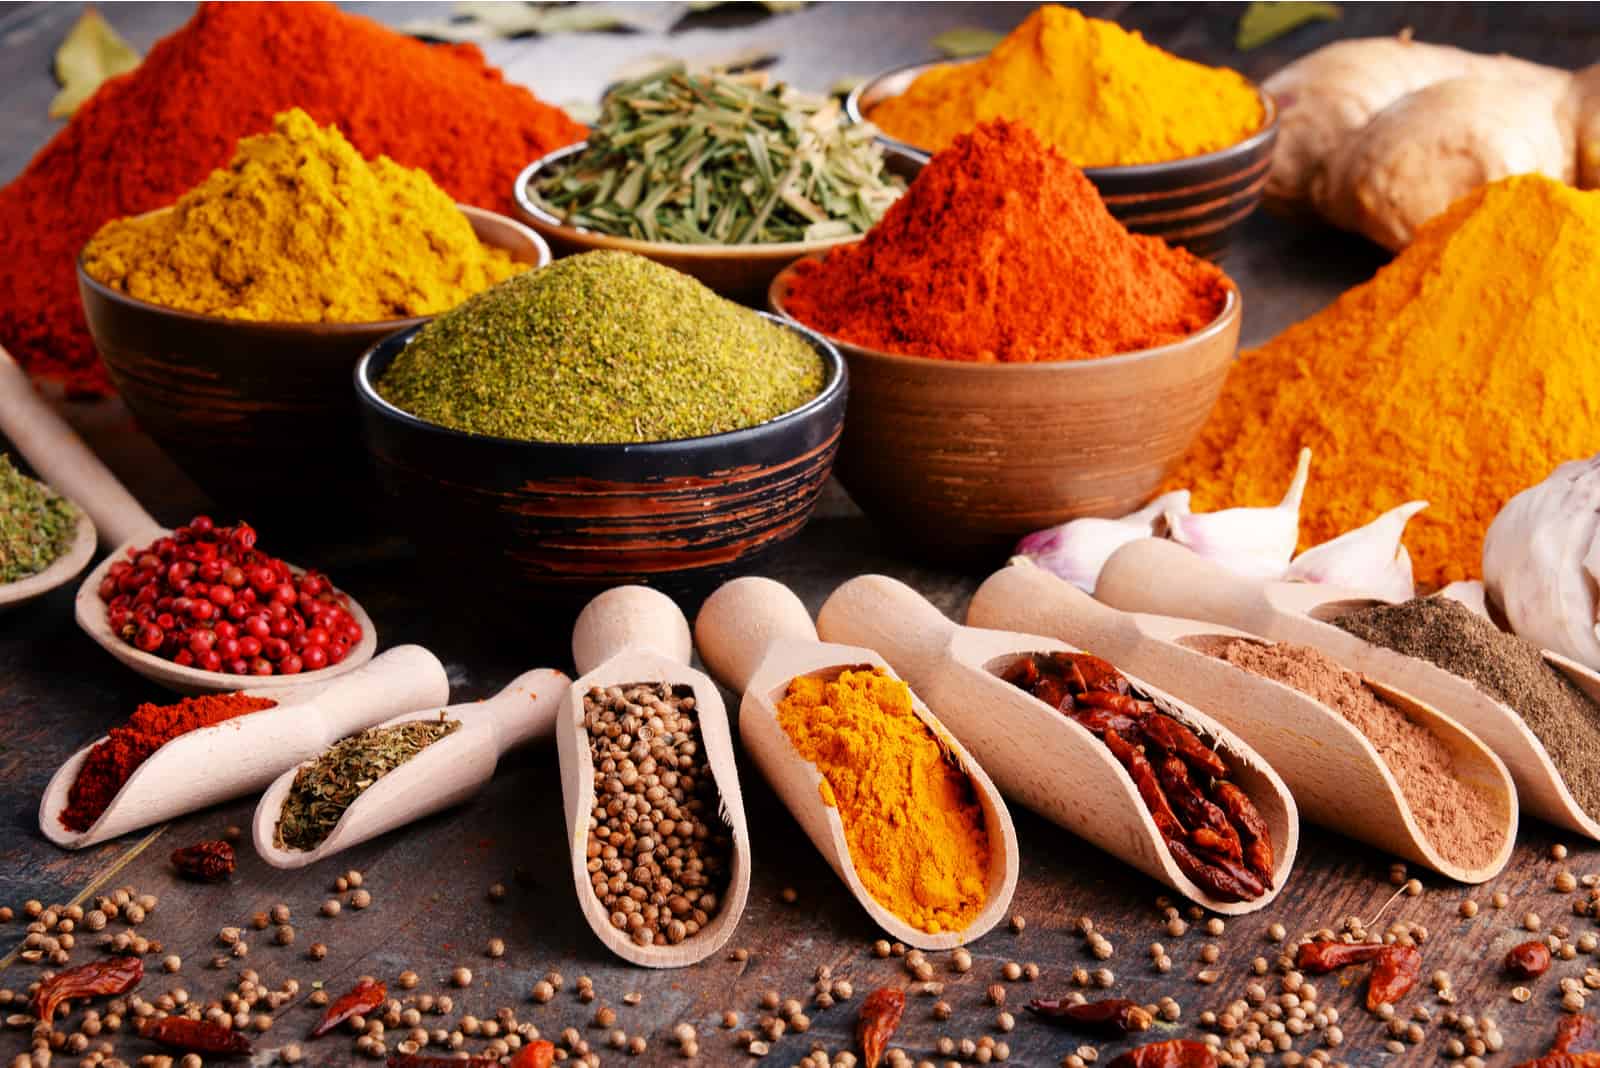 various kinds of spices in bowls on the table